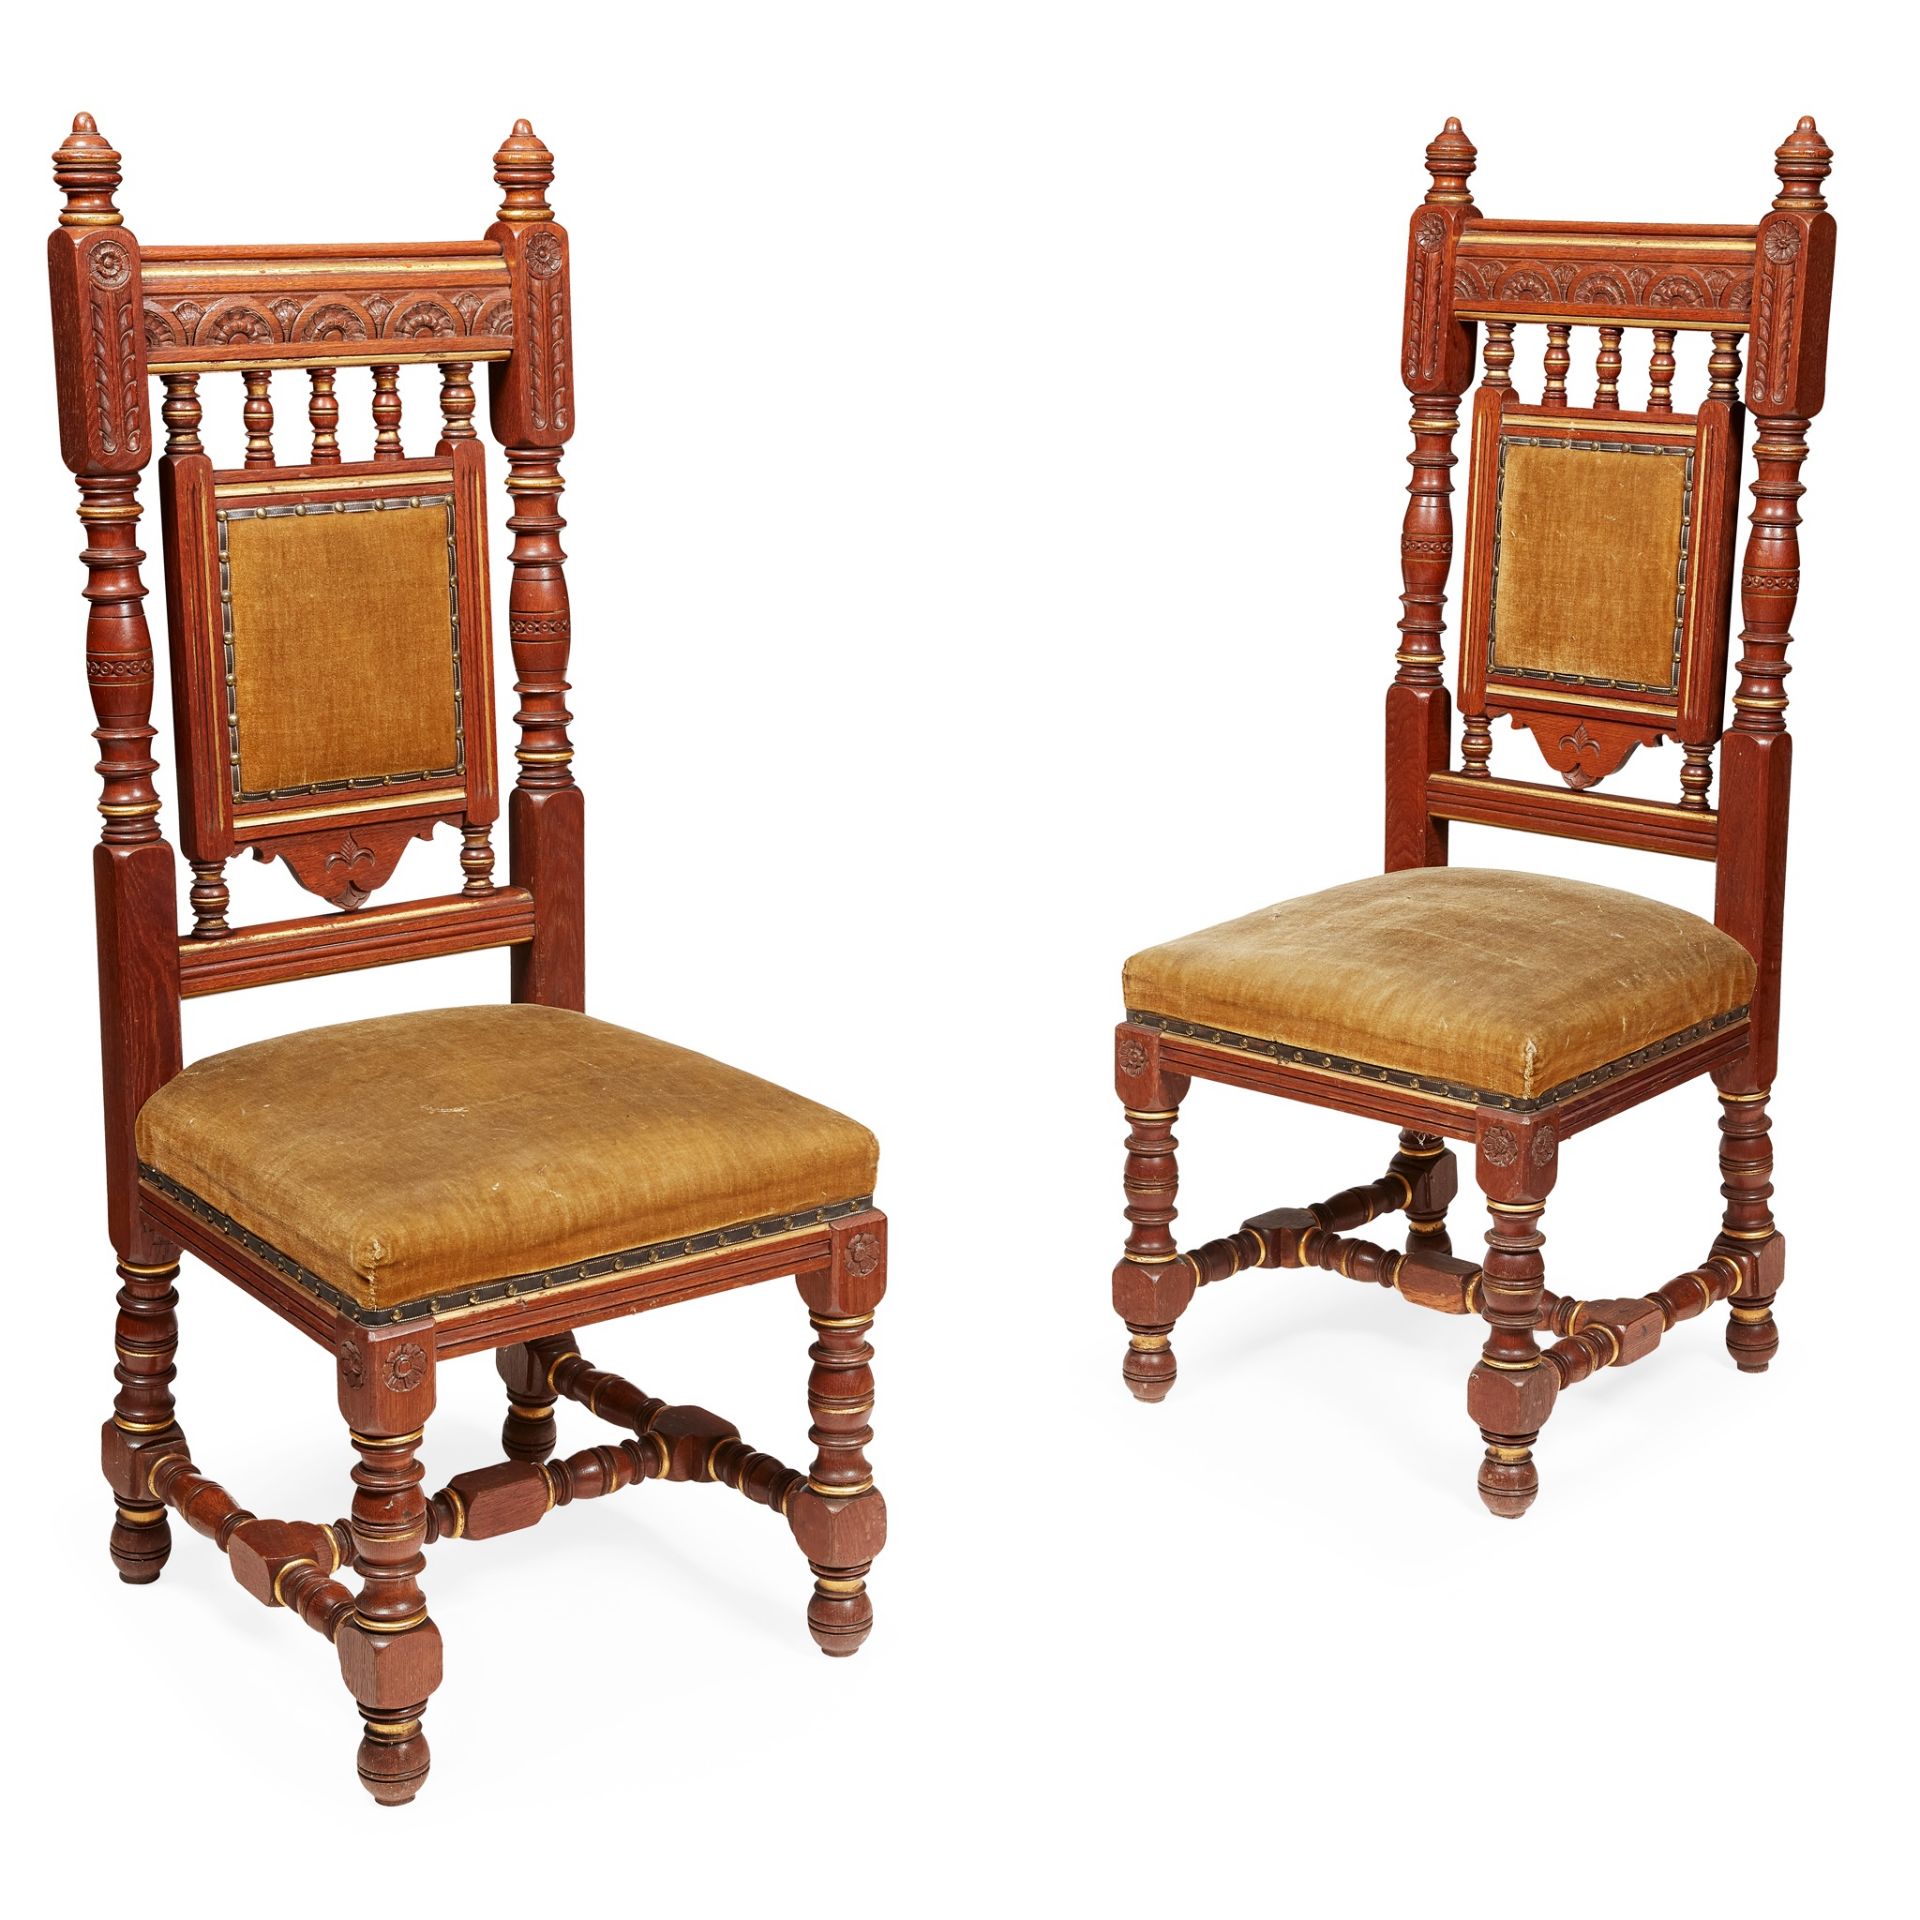 BRUCE J. TALBERT (1838-1881) OR H. W. BATLEY (1846-1932) FOR GILLOW & CO. PAIR OF GOTHIC REVIVAL